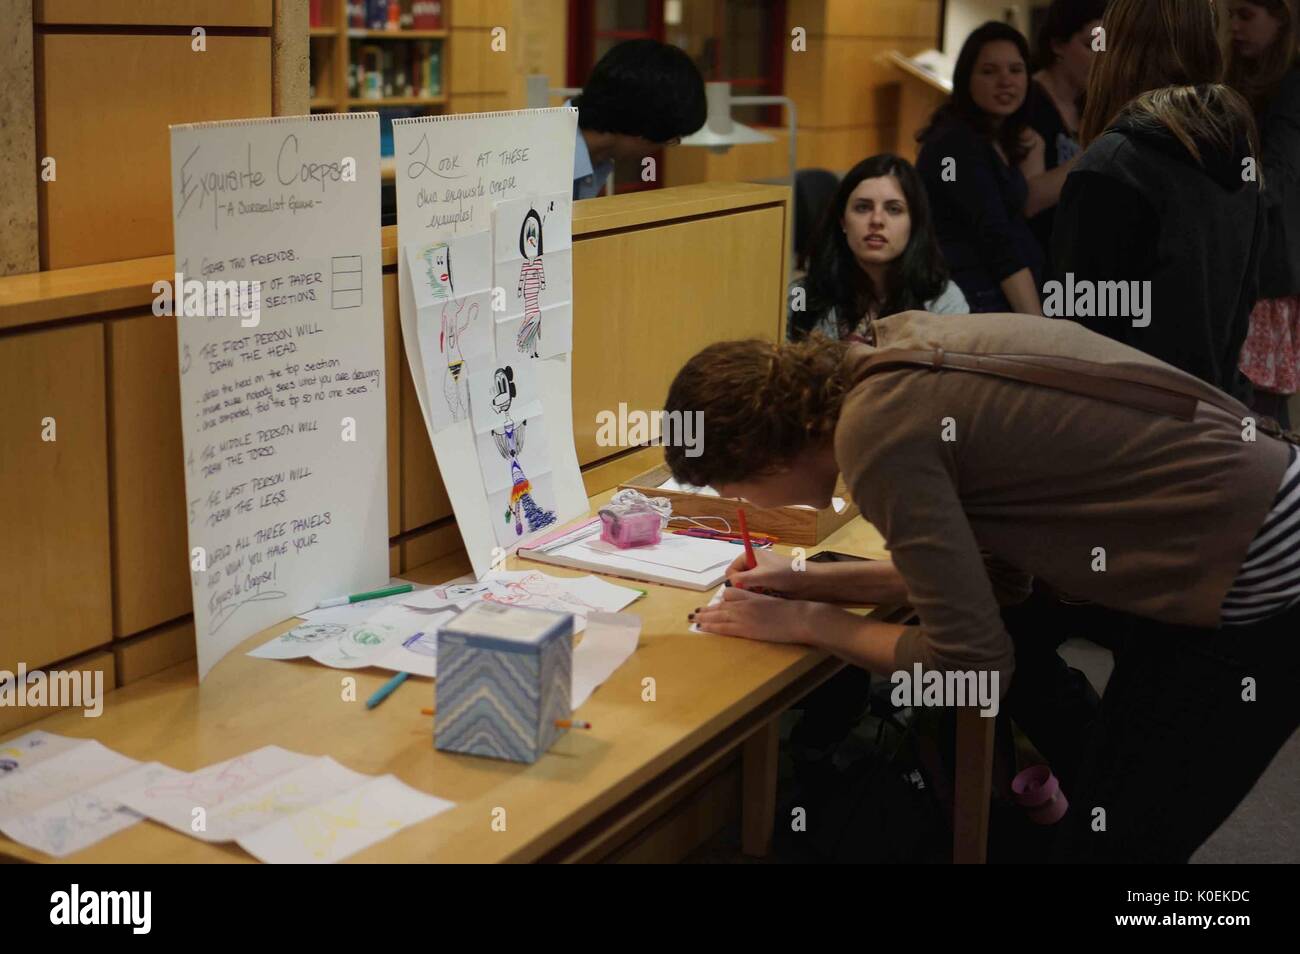 College students participate in an interactive activity on M-level (the main level) of the Milton S. Eisenhower Library on the Homewood campud of the Johns Hopkins University in Baltimore, Maryland, 2014. Courtesy Eric Chen. Stock Photo